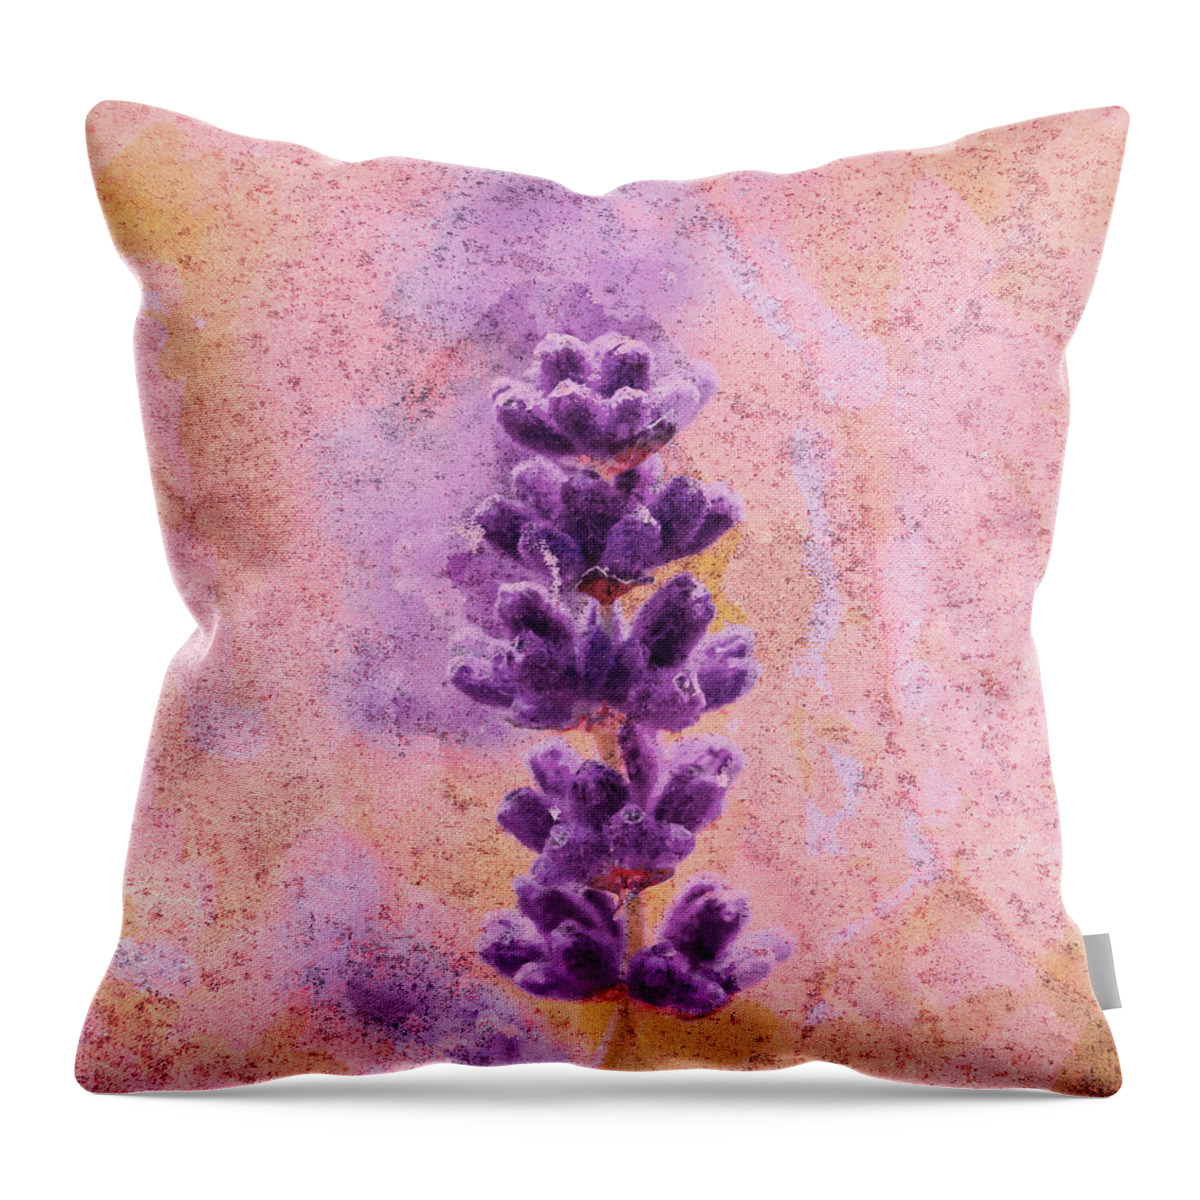 Flower Throw Pillow featuring the photograph Lavandula Beauty by Tanya C Smith